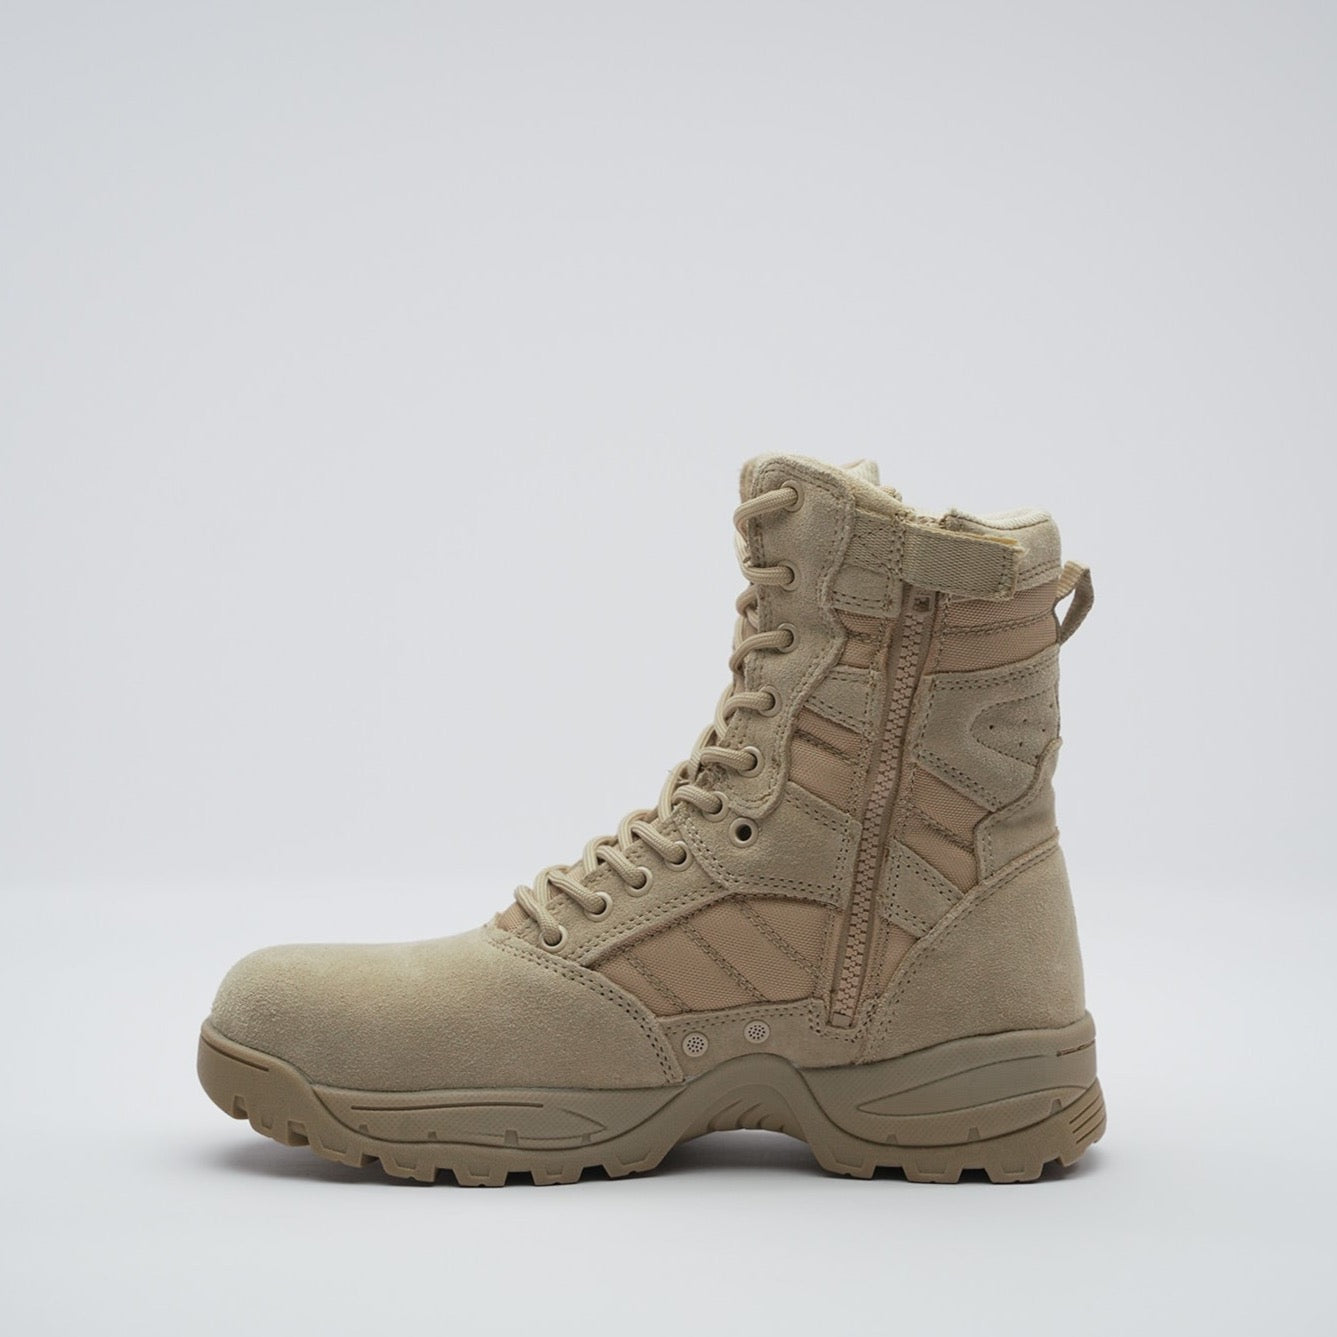 side view of desert tan boot with side zip and vents for breathability